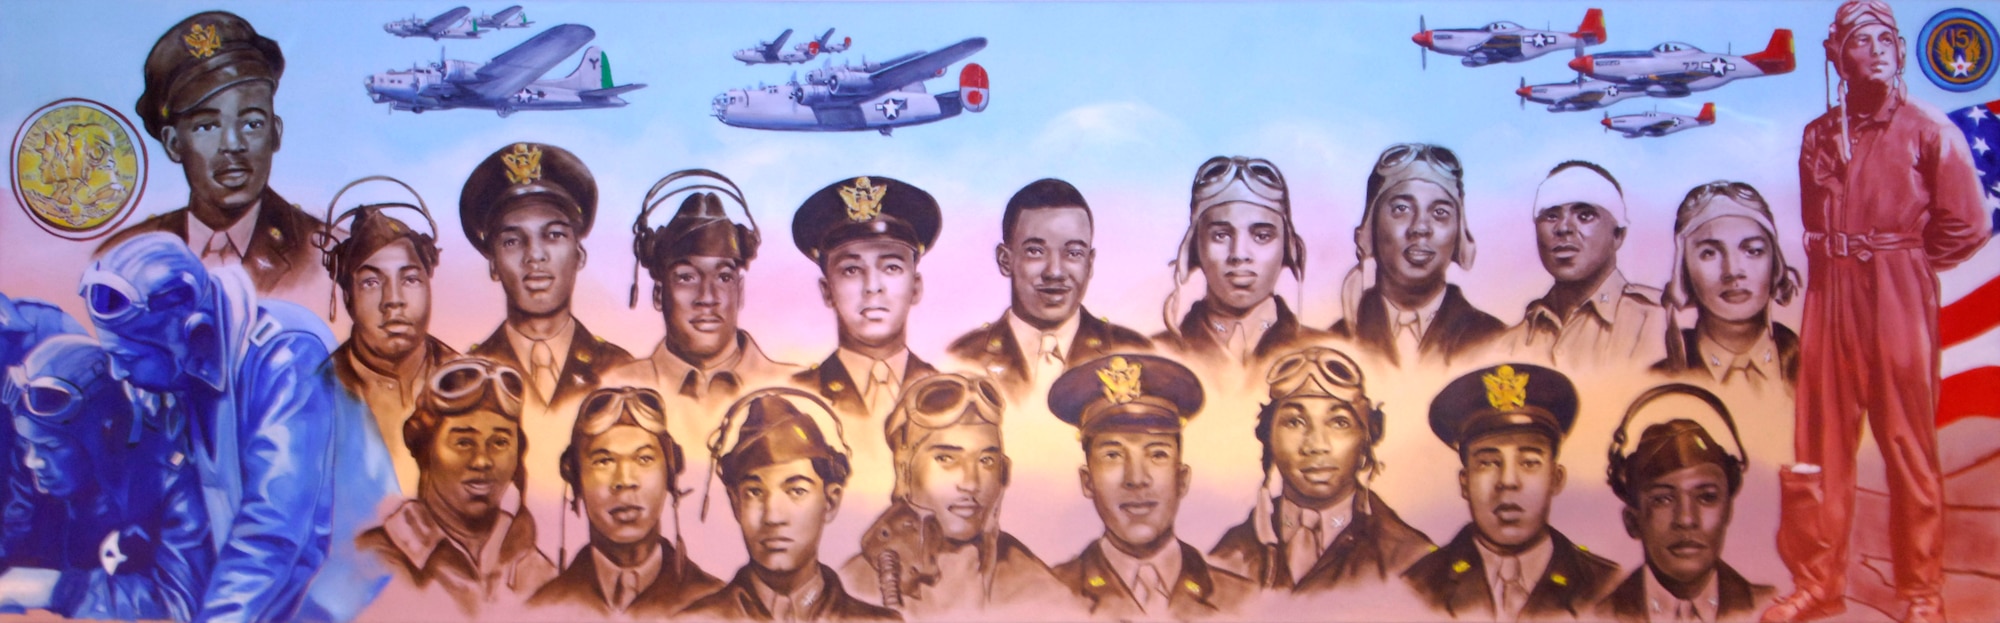 Tuskegee Airman paintings by veteran artist William Curtis, hang on display in the library on Scott Air Force Base, Ill. The paintings will be available for viewing from Jan. through March. The Tuskegee Airmen were awarded 150 Distinguished Flying Crosses, eight Purple Hearts, 14 Bronze stars and a Distinguished Unit Citation.(U.S. Air Force photo/Airman 1st Class Jake Eckhardt)